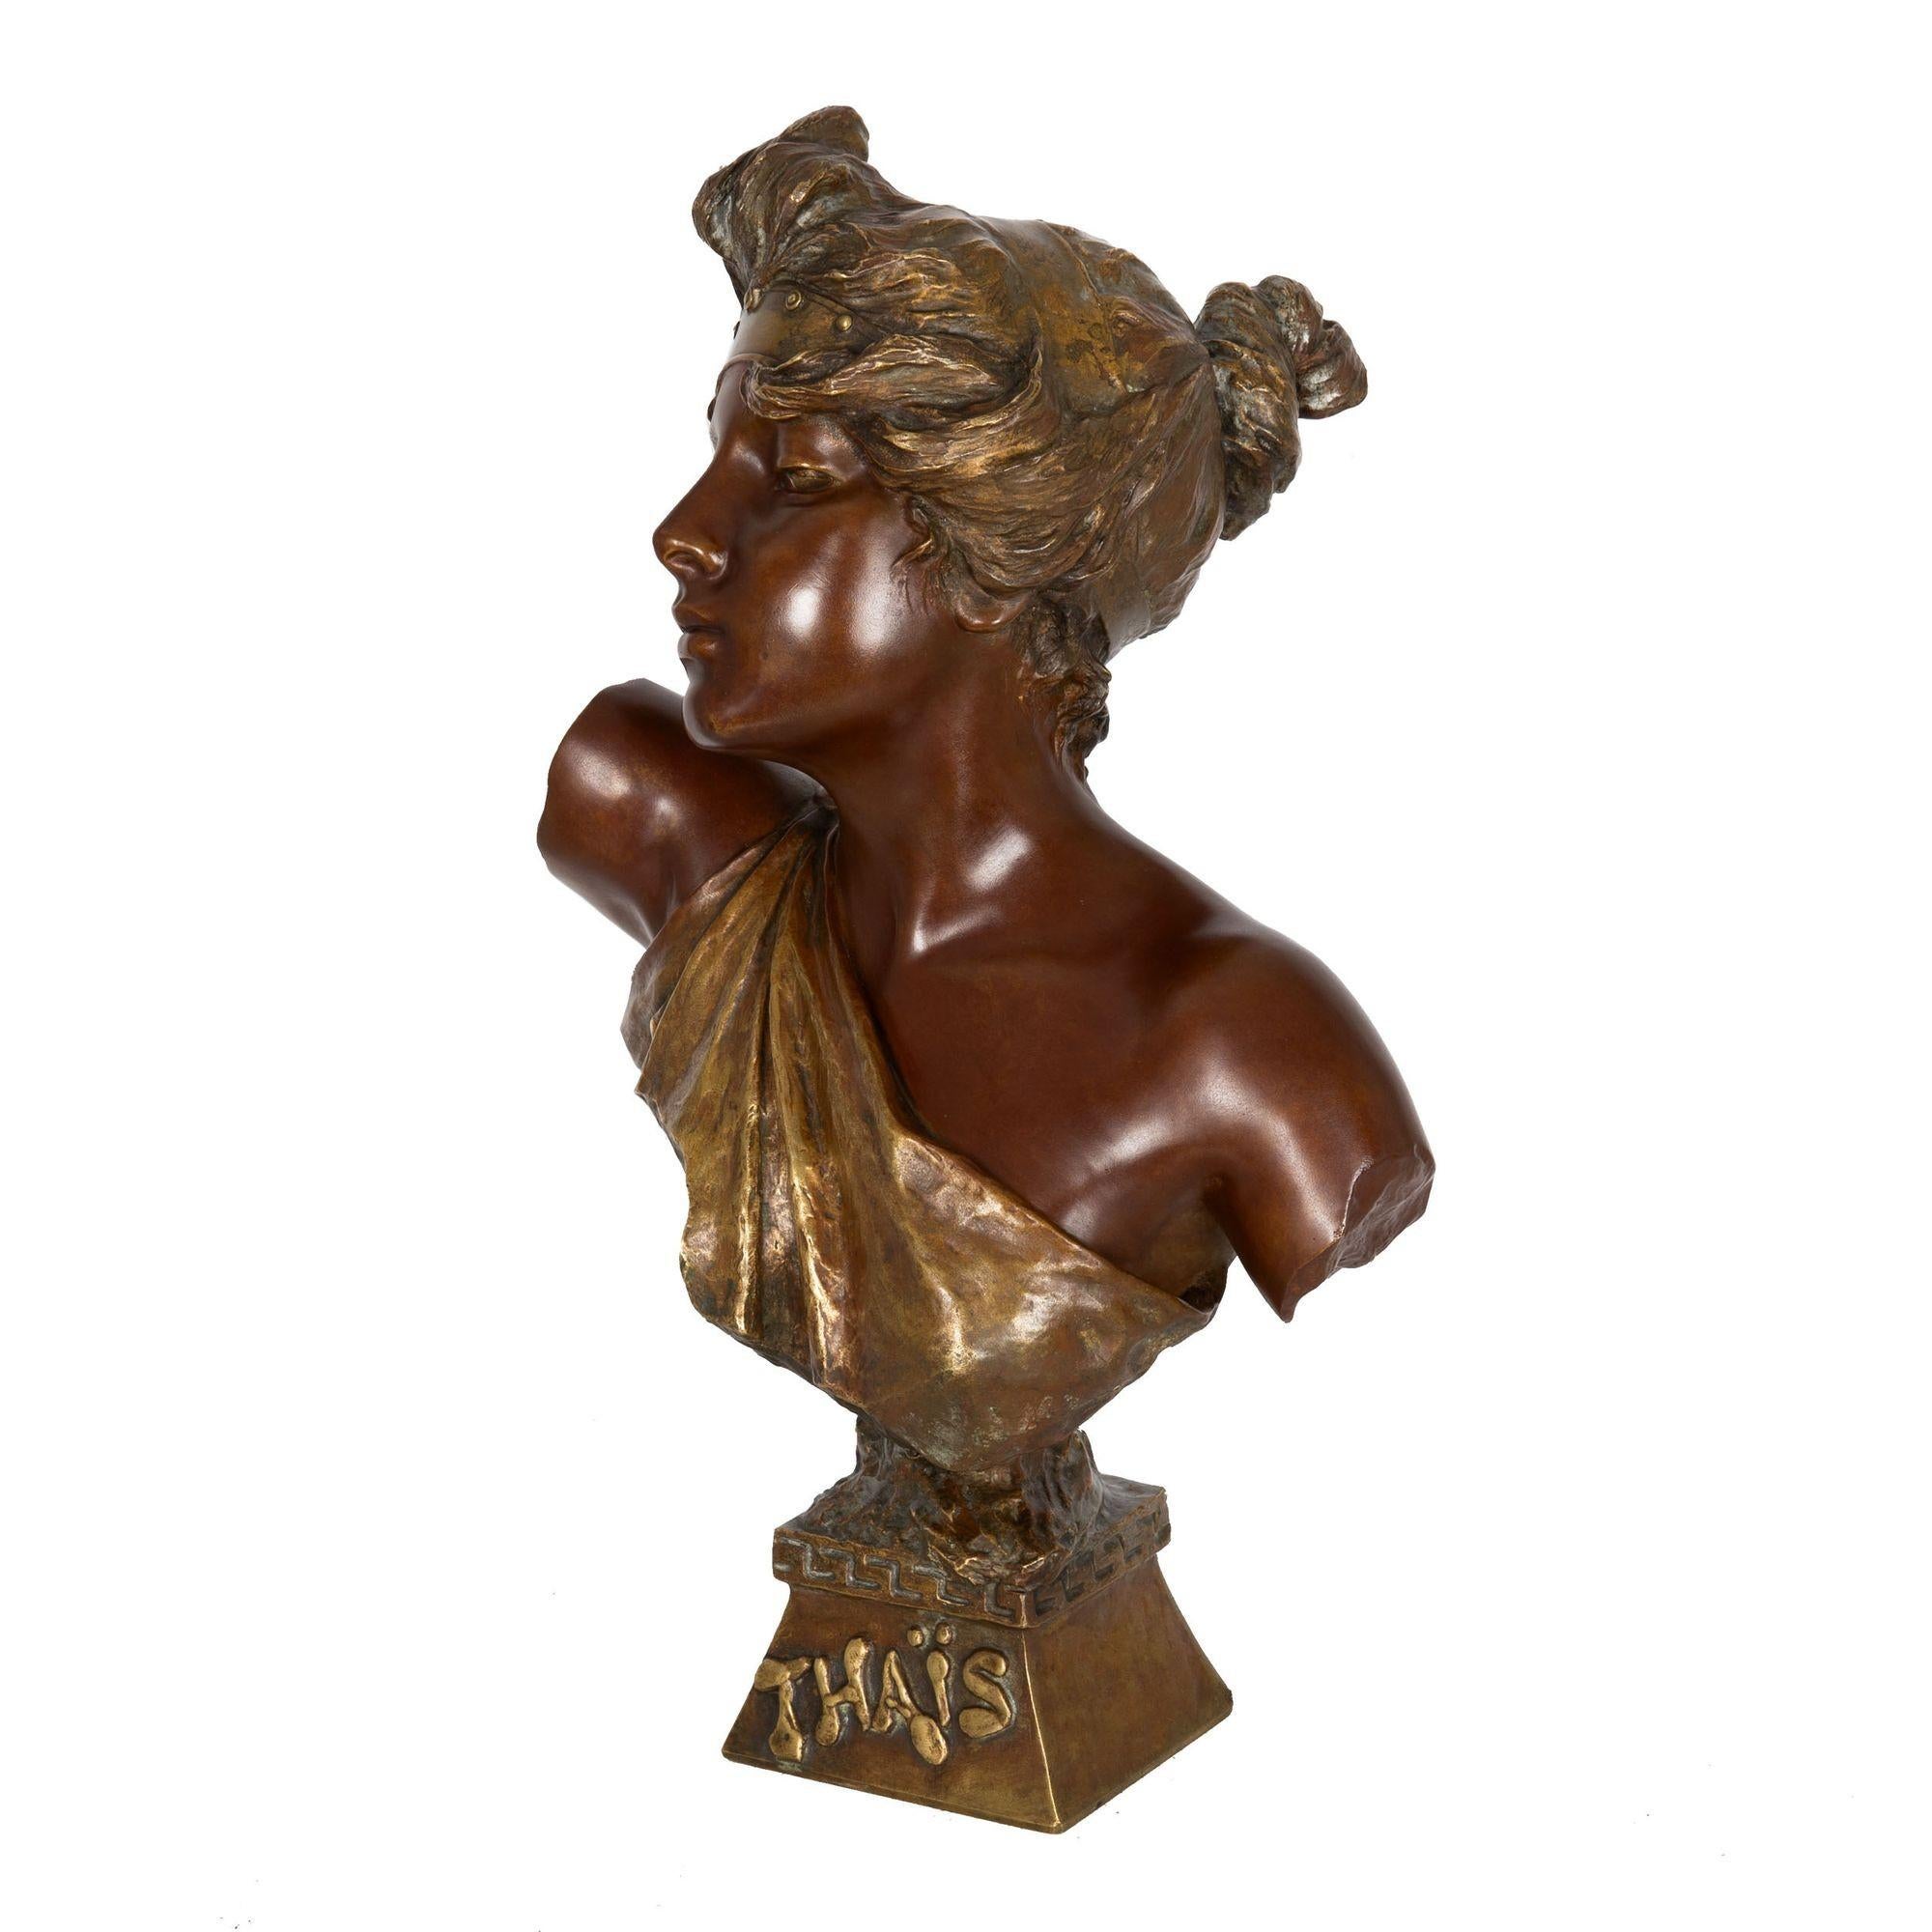 French Art Nouveau Bronze Sculpture “Bust of Thais” by Emmanuel Villanis In Good Condition For Sale In Shippensburg, PA